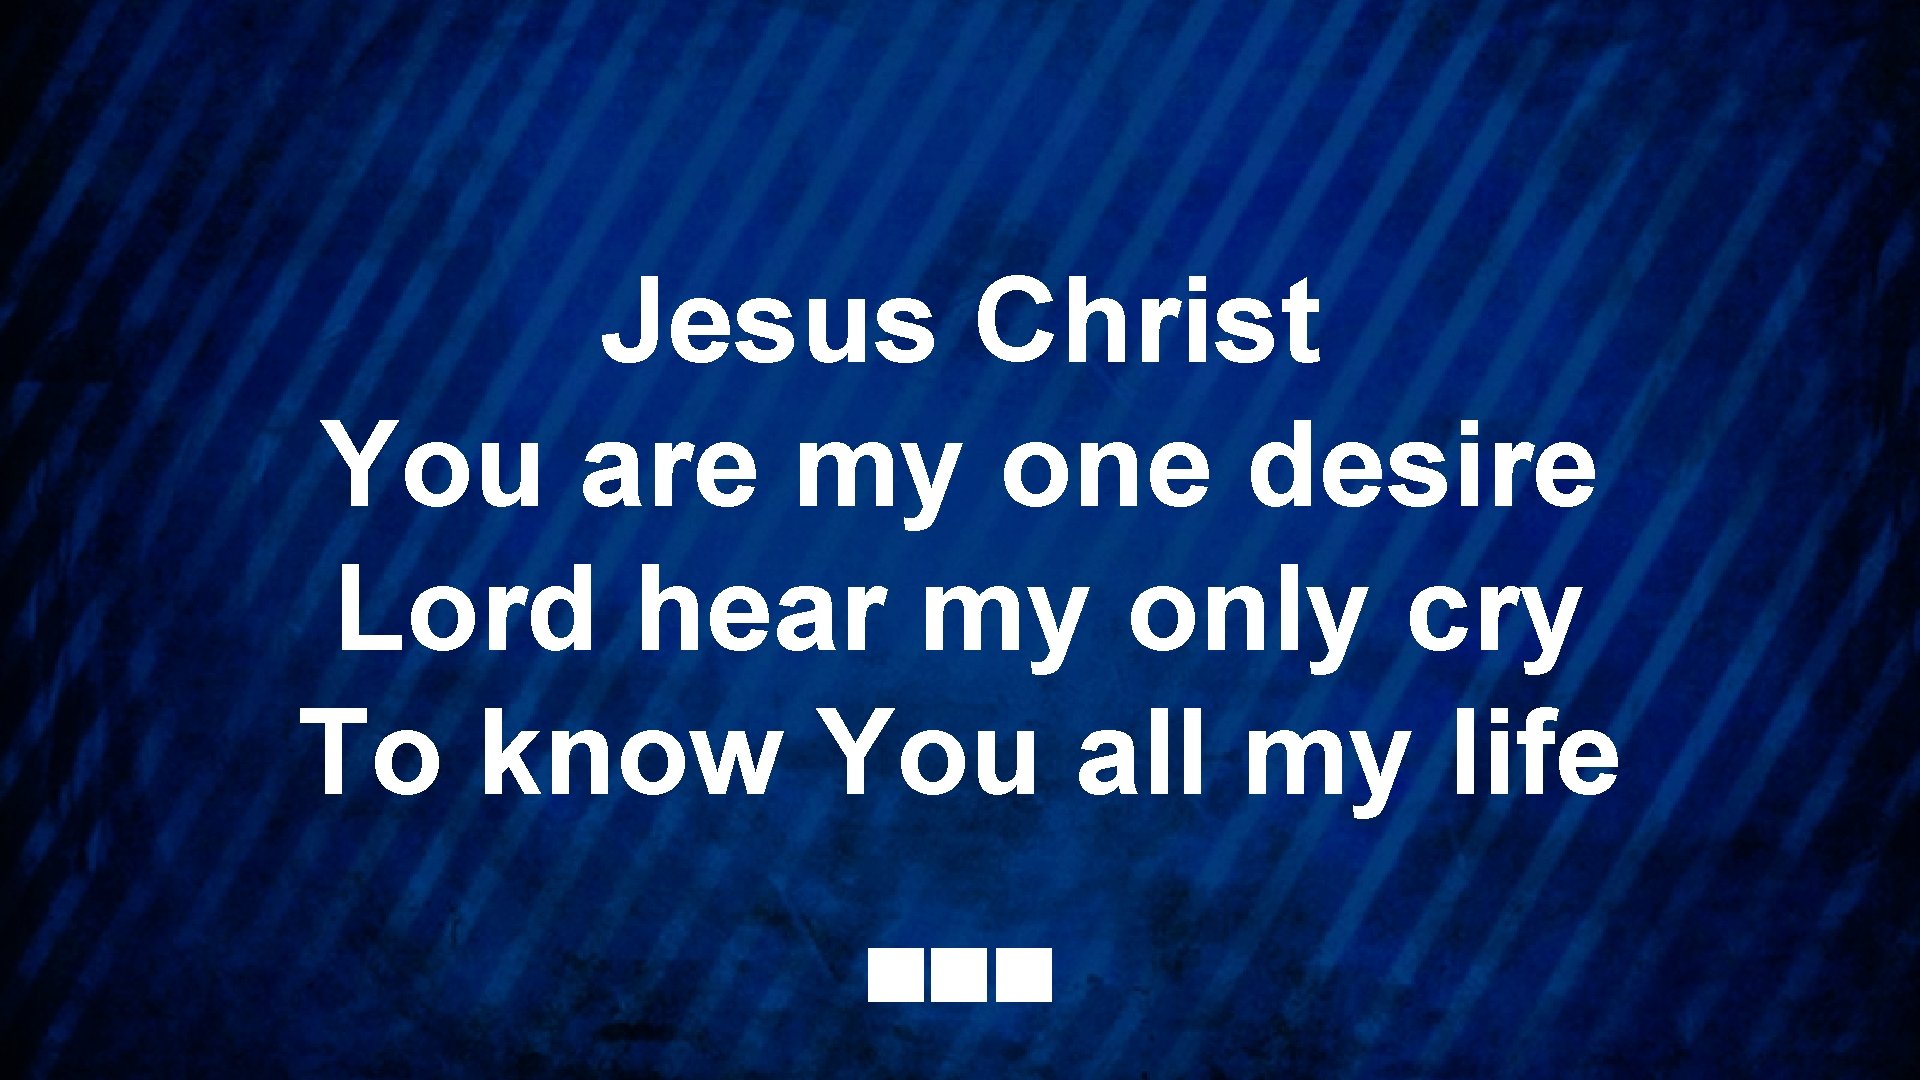 Jesus Christ You are my one desire Lord hear my only cry To know